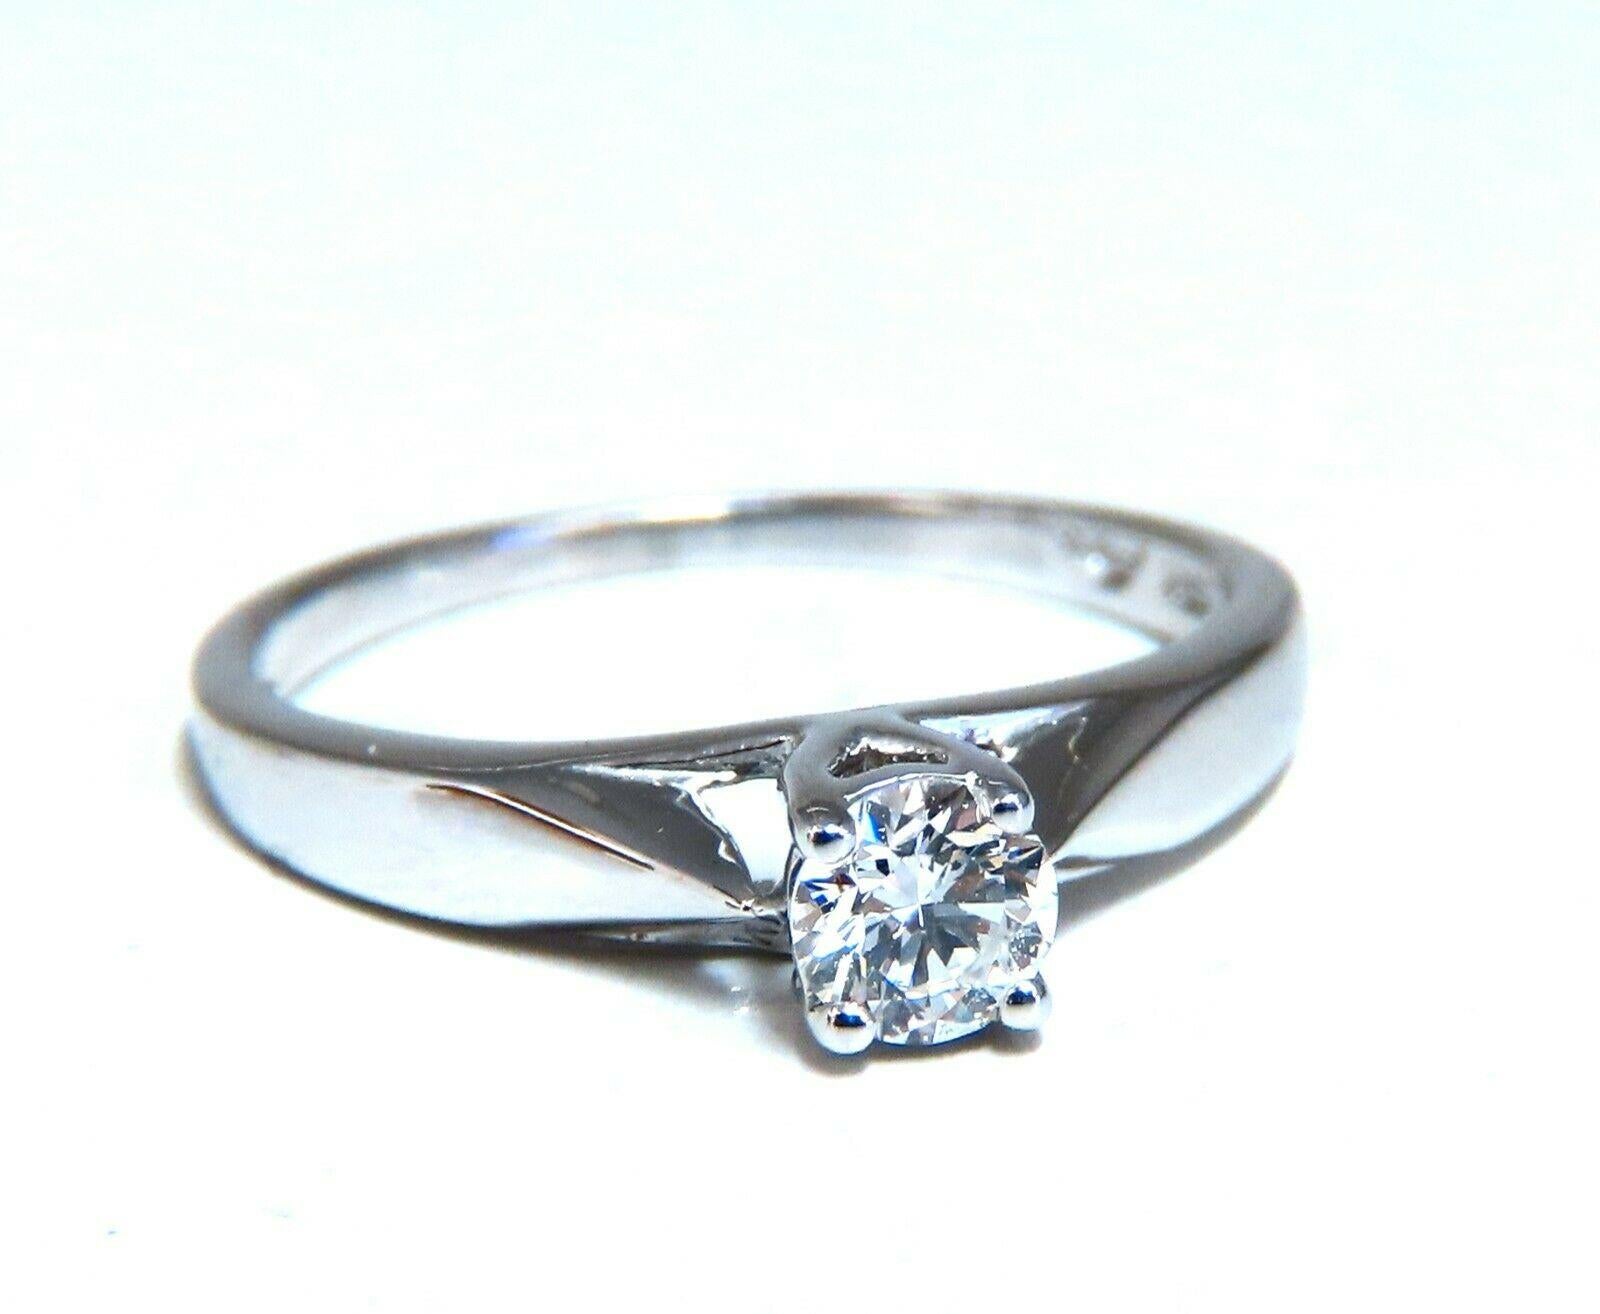 Traditional Engagement ring.

.35ct. round natural diamond

3.8mm diameter. 

G-color Vs2 clarity.

14kt white gold 

2.1 grams.

current ring size: 4.75

We may resize, please inquire.